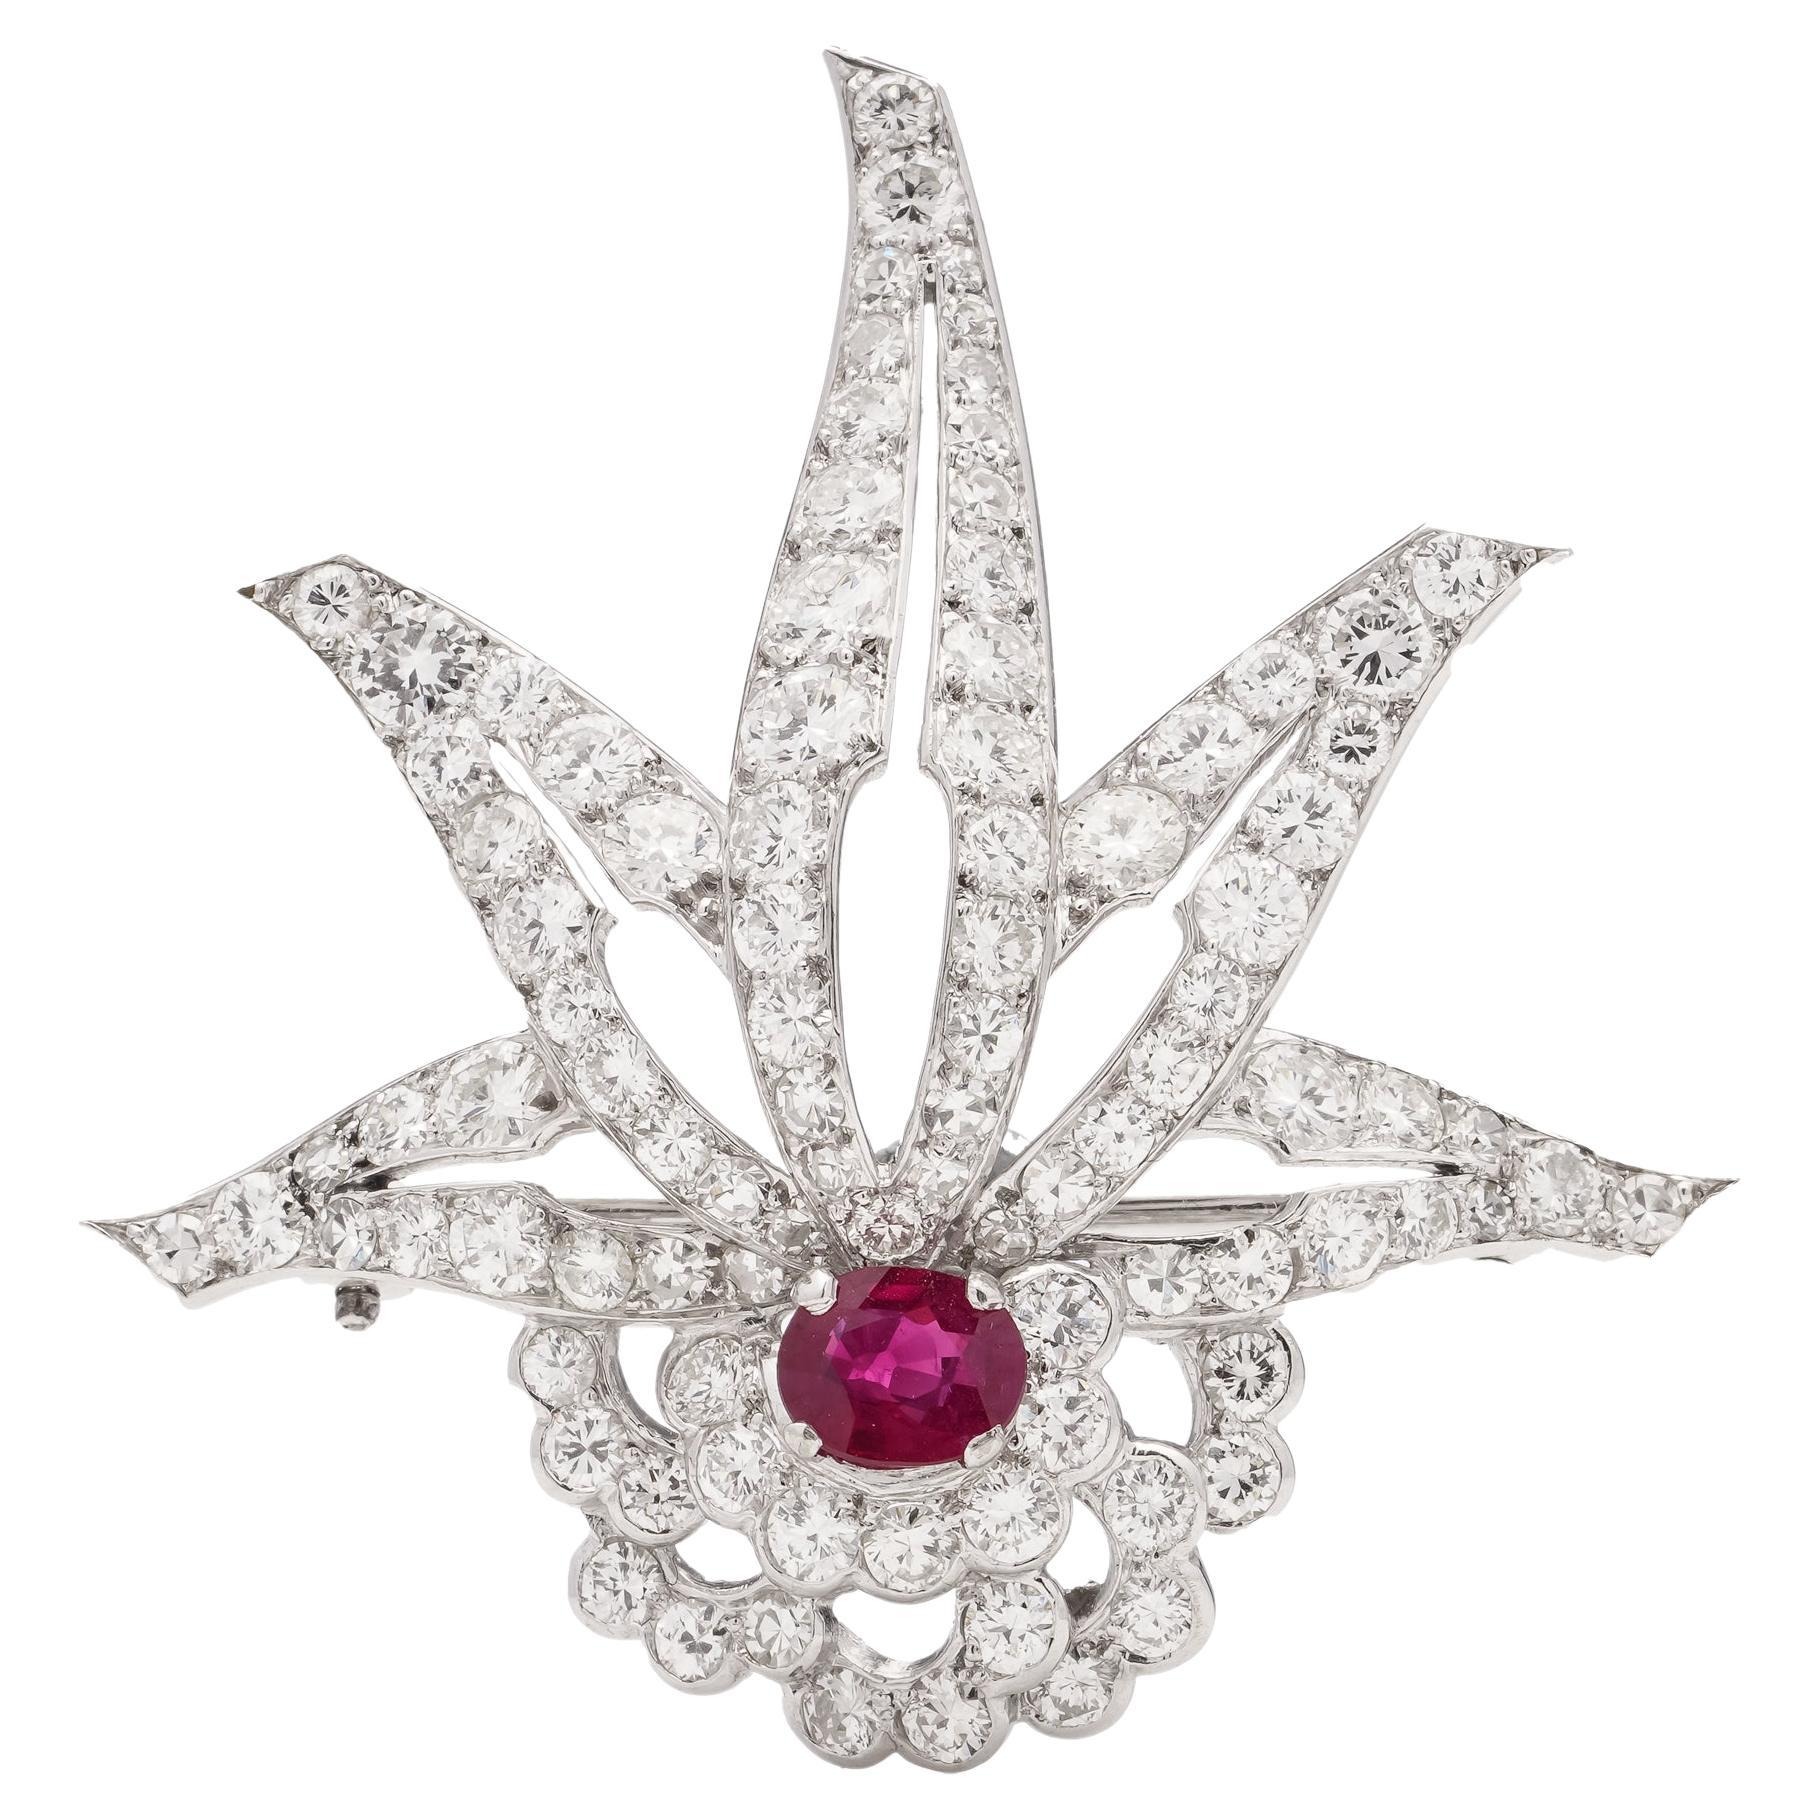 900. platinum brooch set with 4.62 carats of round brilliant diamonds For Sale